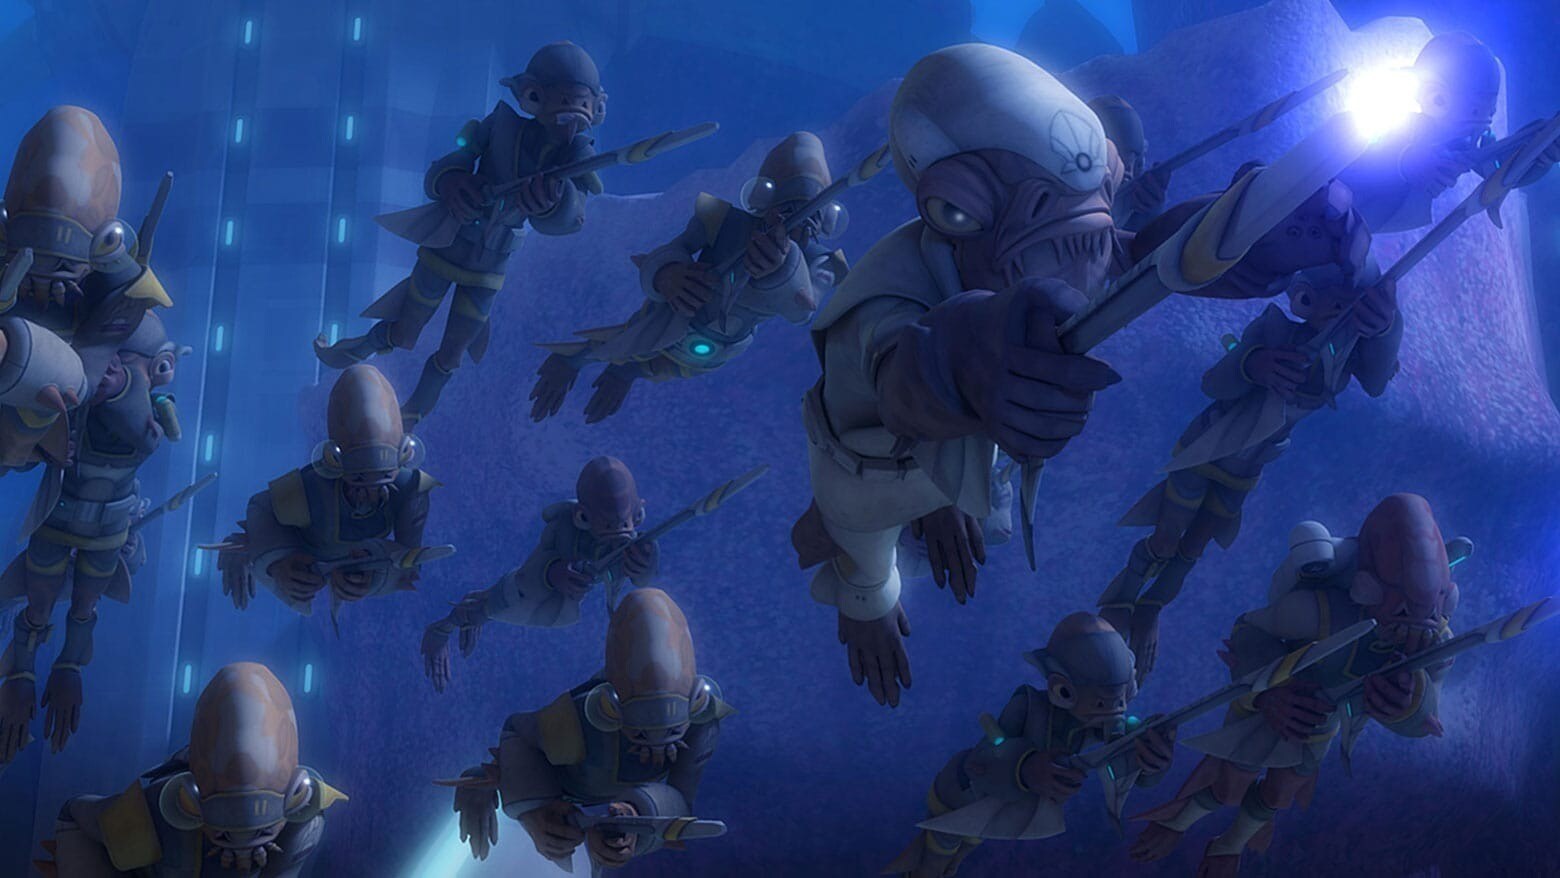 A group of Mon Calamari people holding spears in The Clone Wars